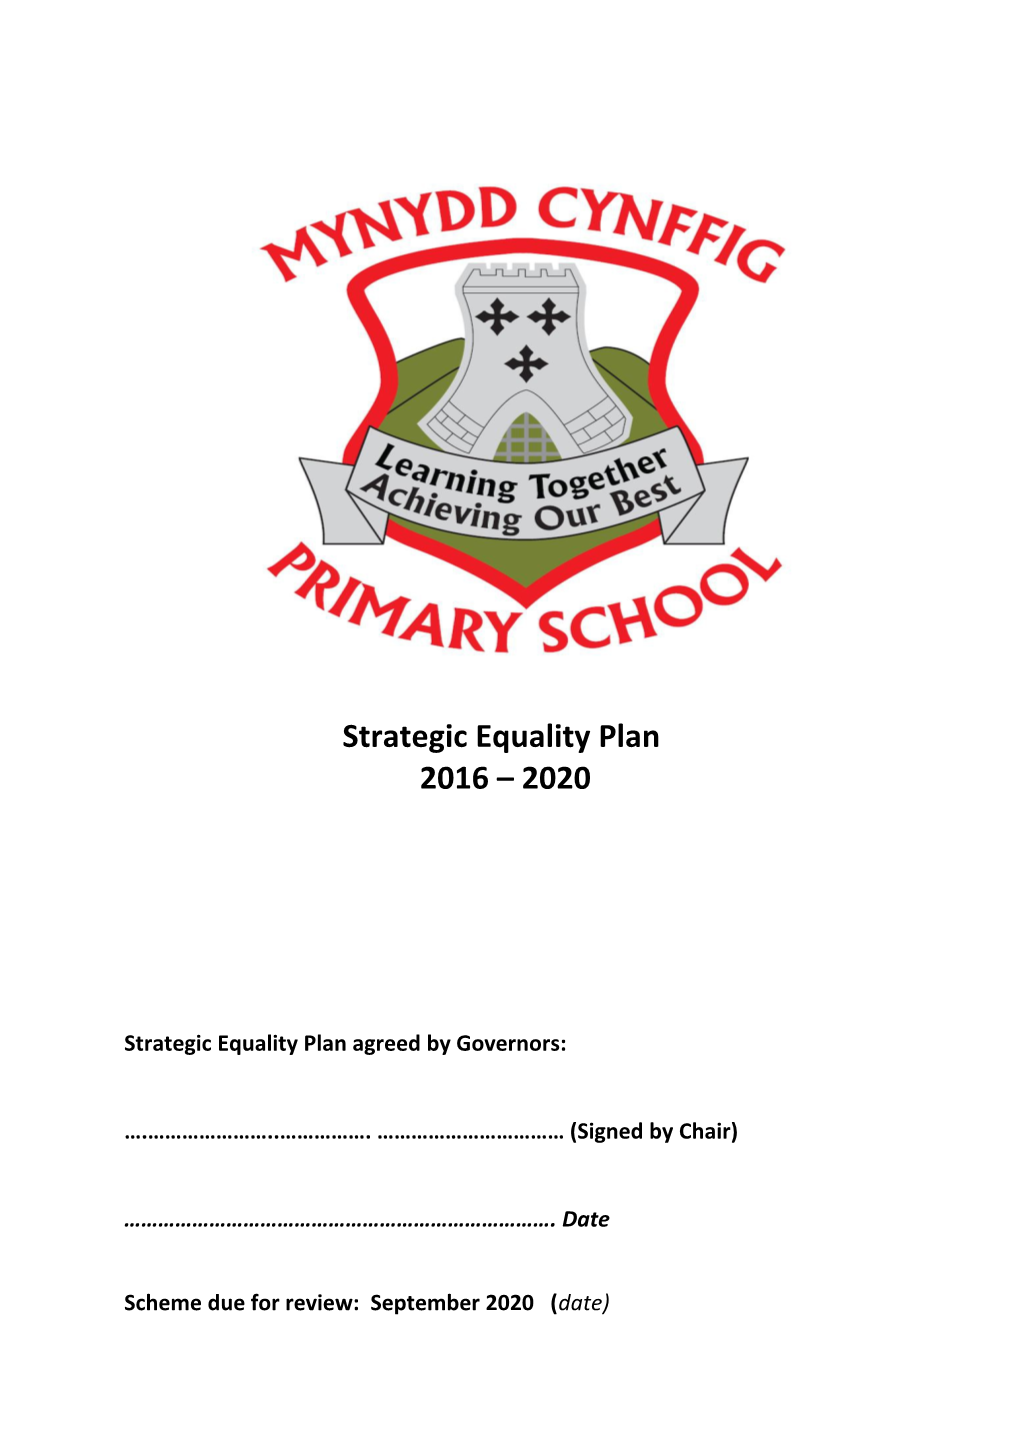 Strategic Equality Plan Agreed by Governors